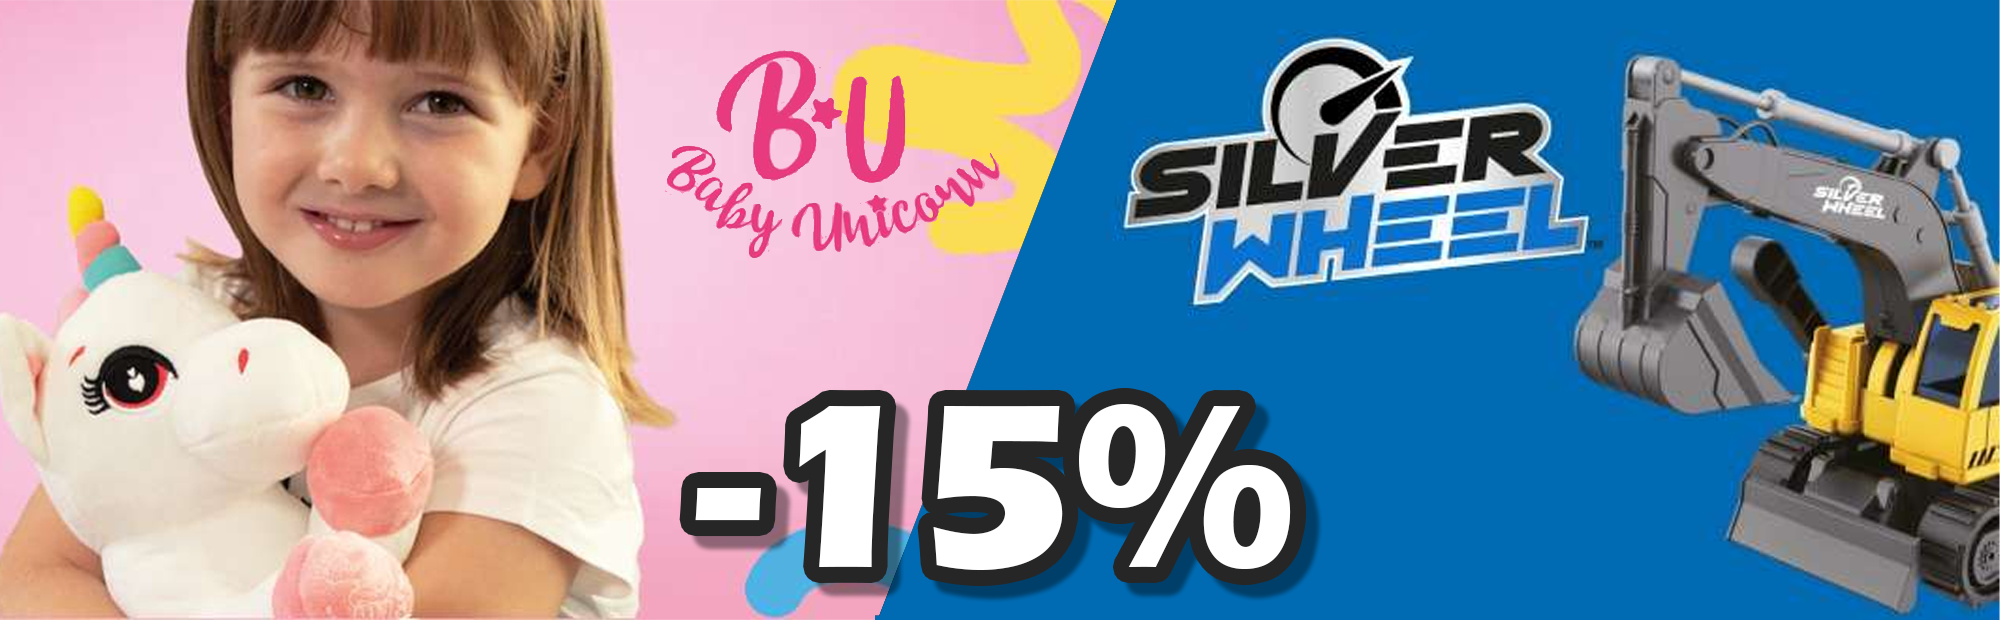 Banner ODS Toys - Discounts on Silver Wheel and MyVip: Unicorn brands